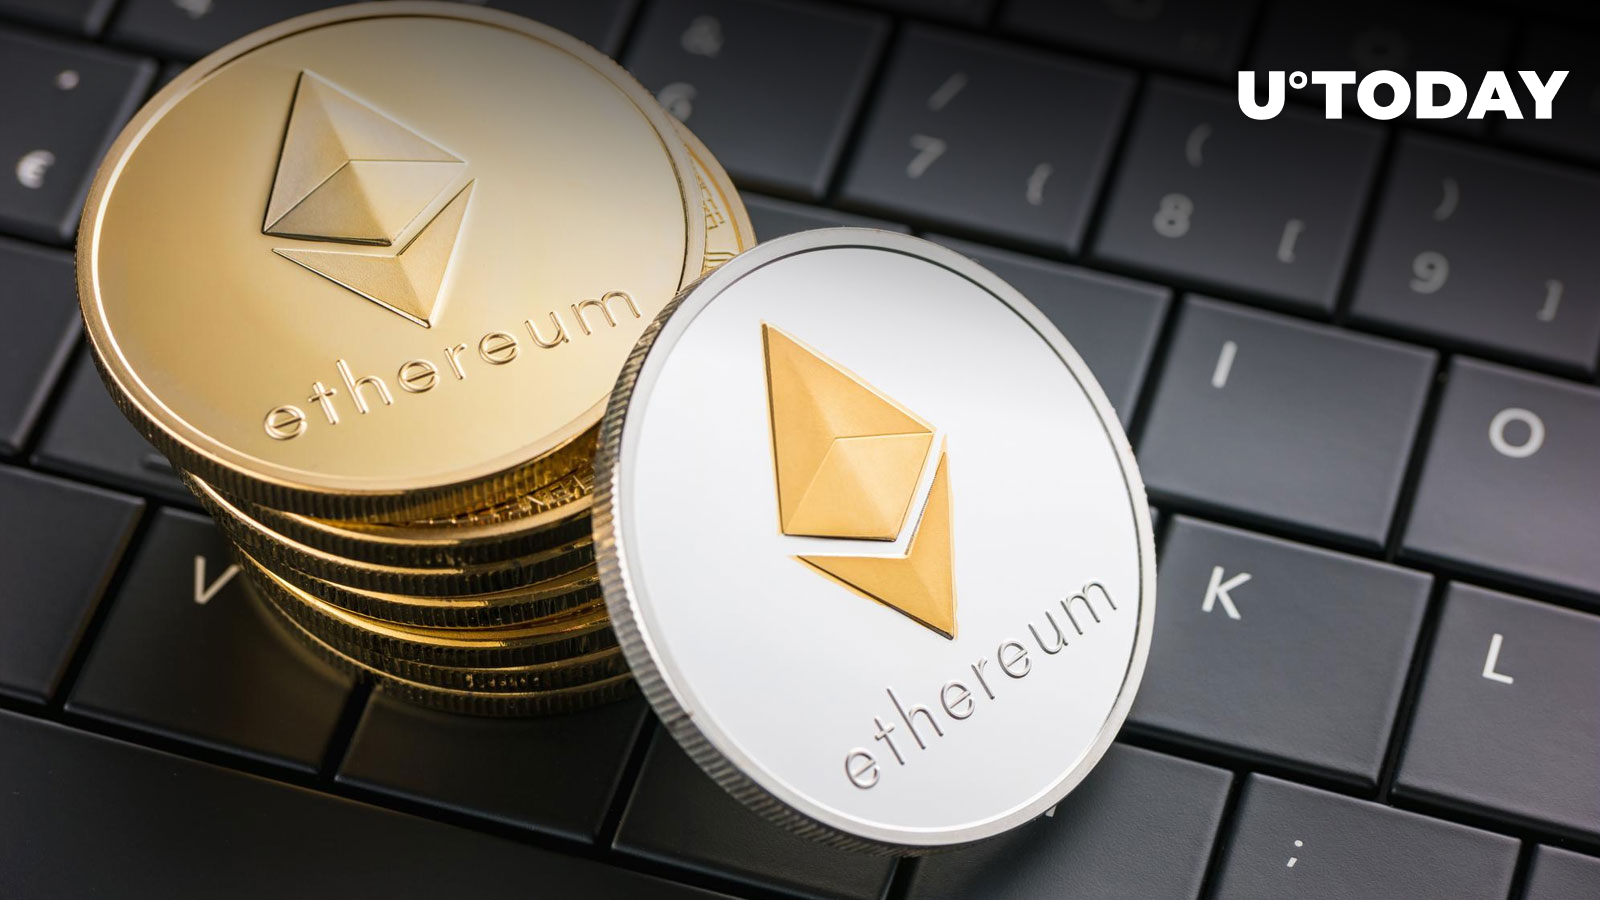 Dormant Ethereum (ETH) Address Wakes Up After More Than 8 Years